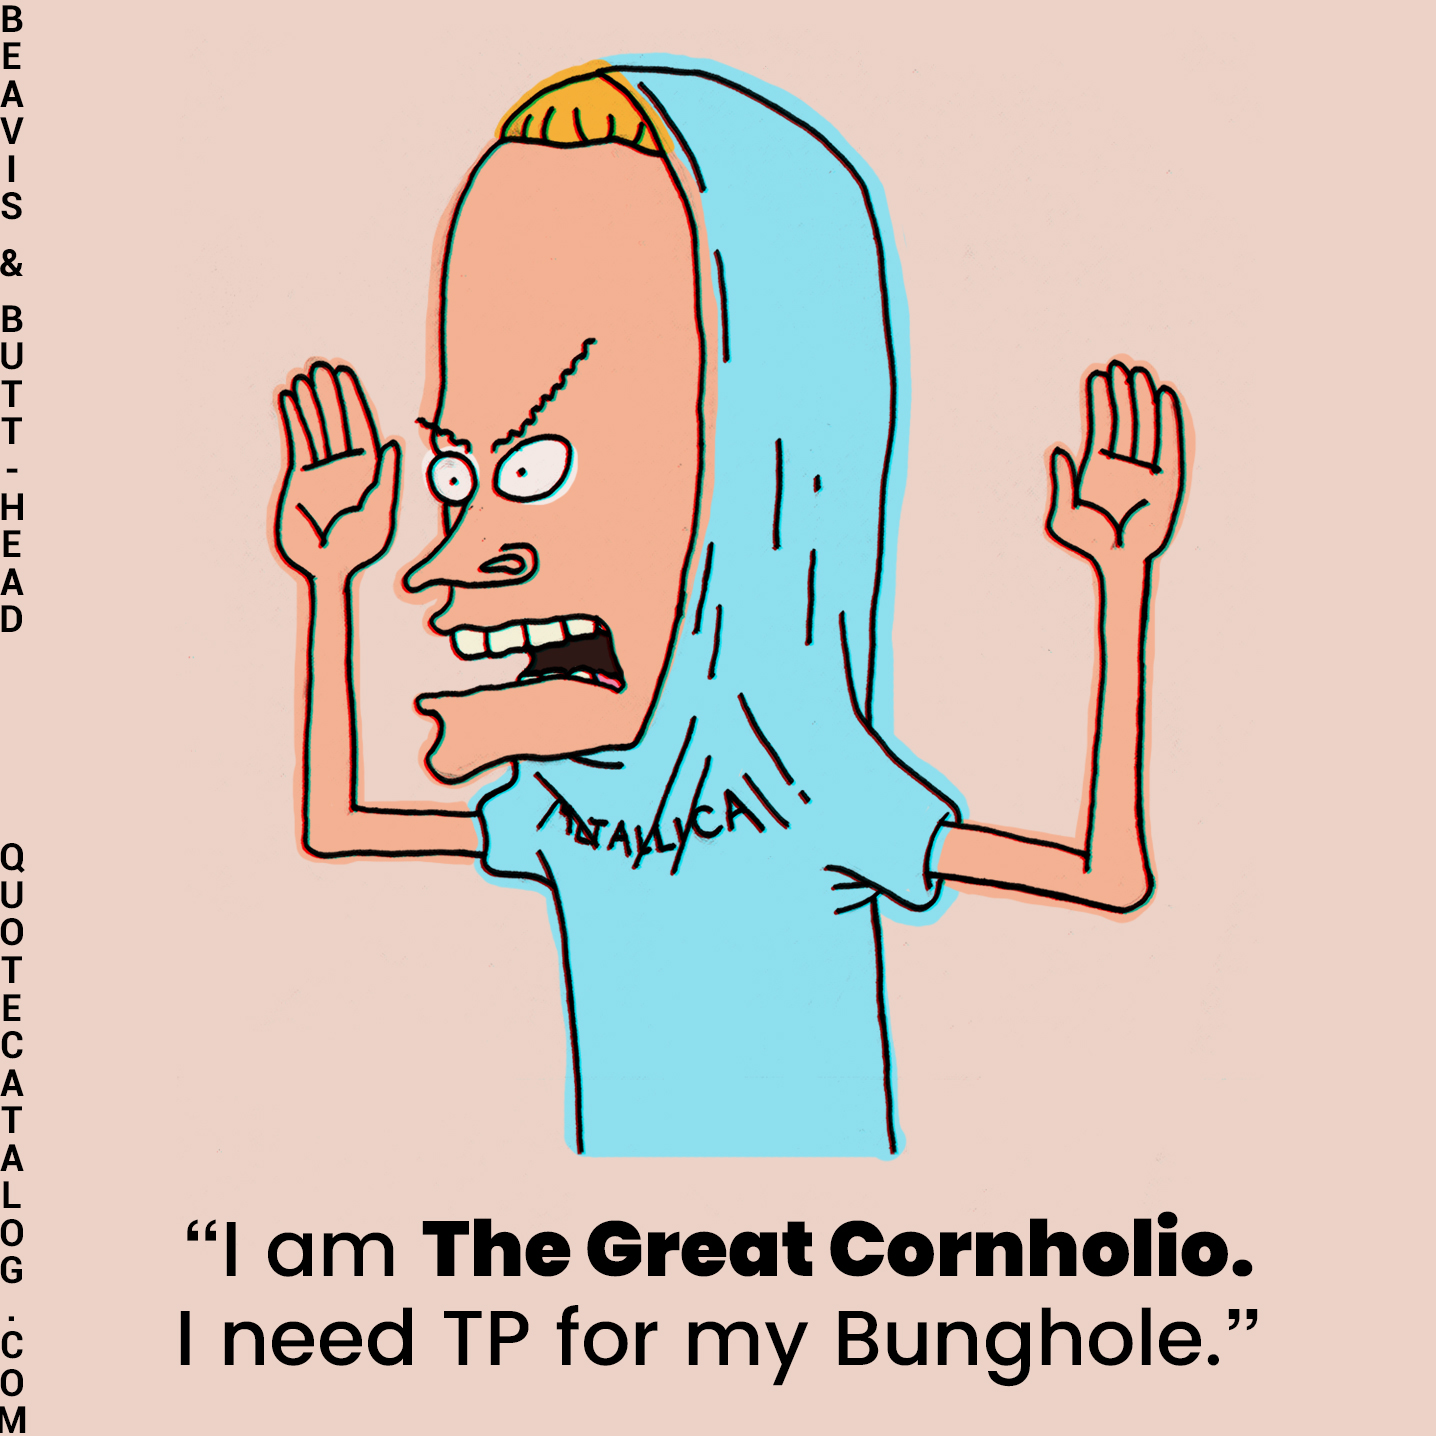 "Do you have T.P. for my bunghole? 